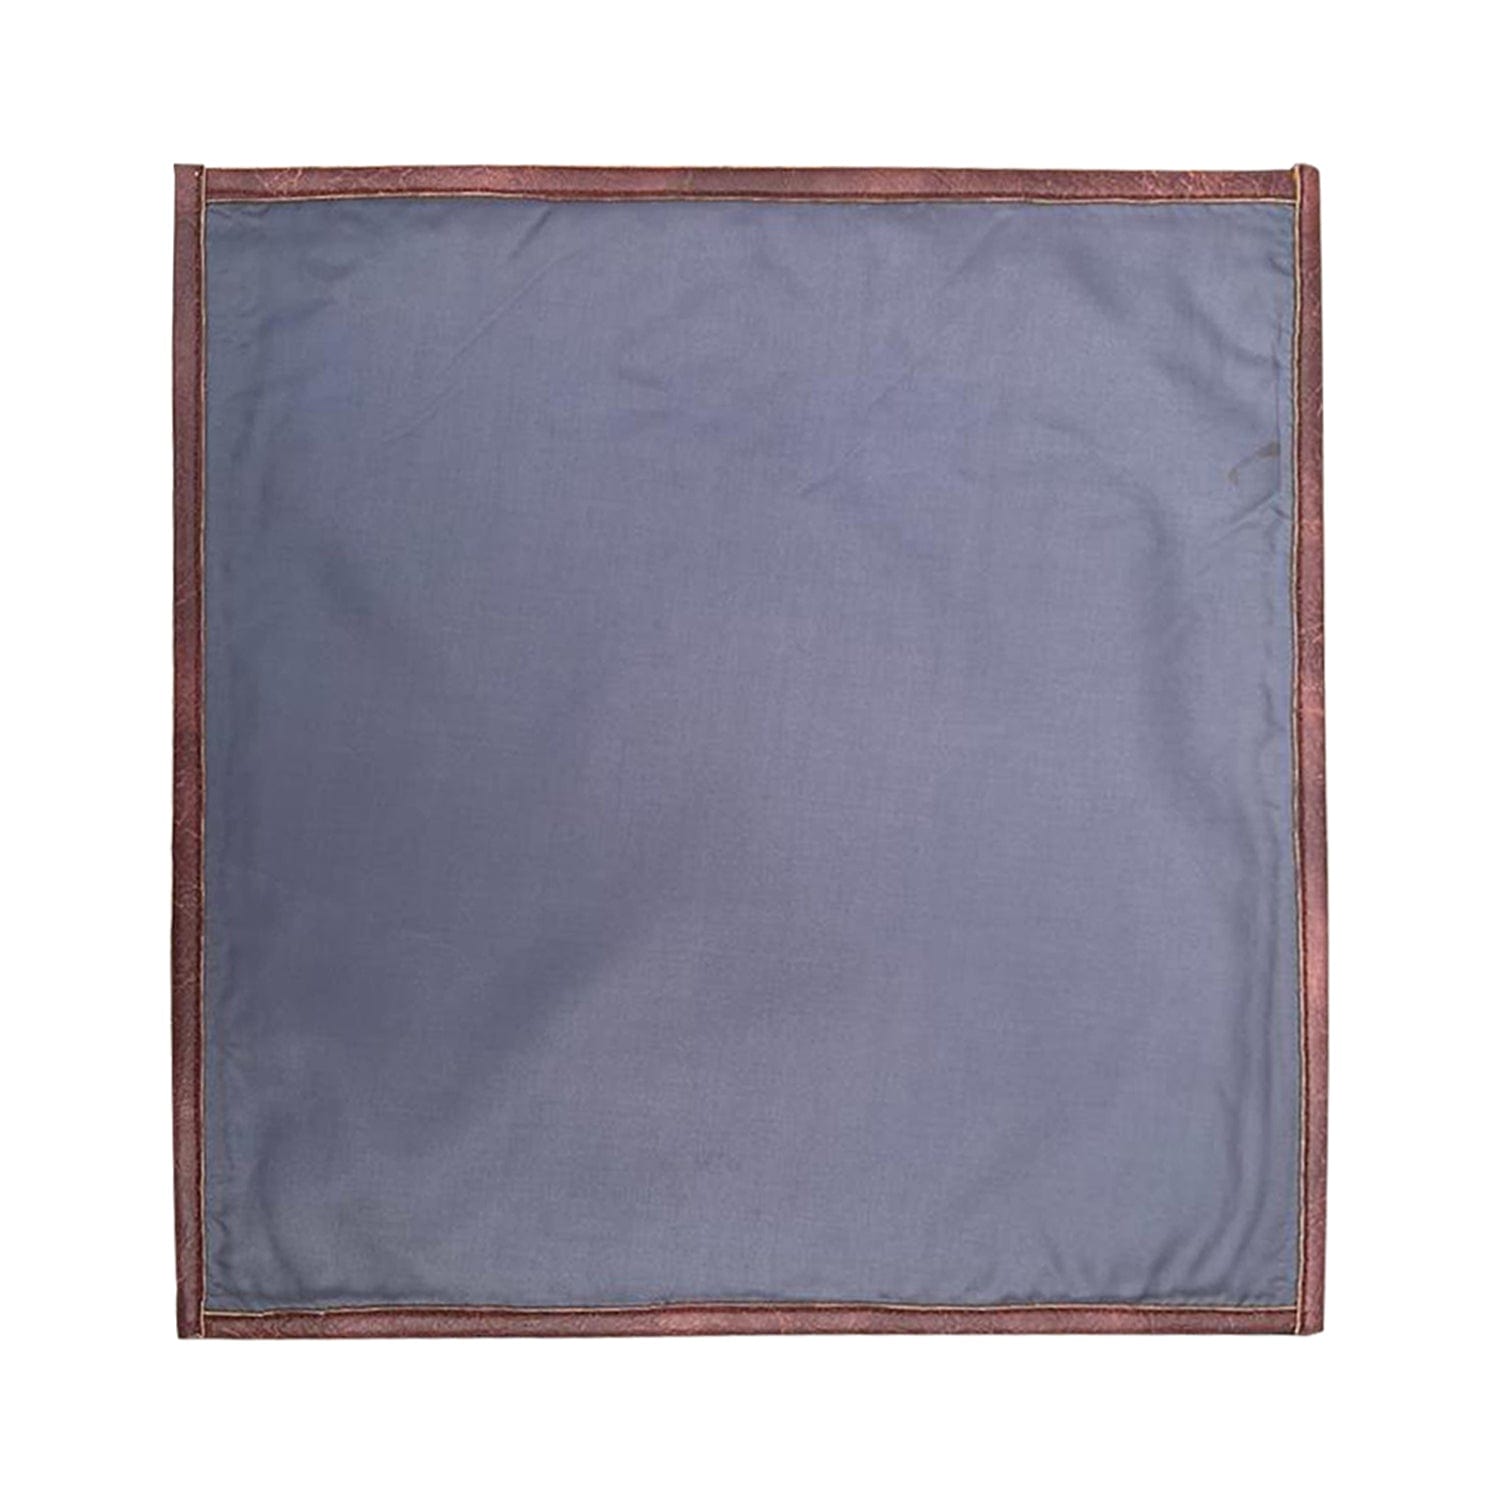 Mona B Set of 2 Printed Placemats, 13 INCH Square, Best for Bed-Side Table/Center Table, Dining Table/Shelves- PP-101 - Placemat by Mona-B - Backpack, Flat30, New Arrivals, Sale, Shop1999, Shop2999, Shop3999